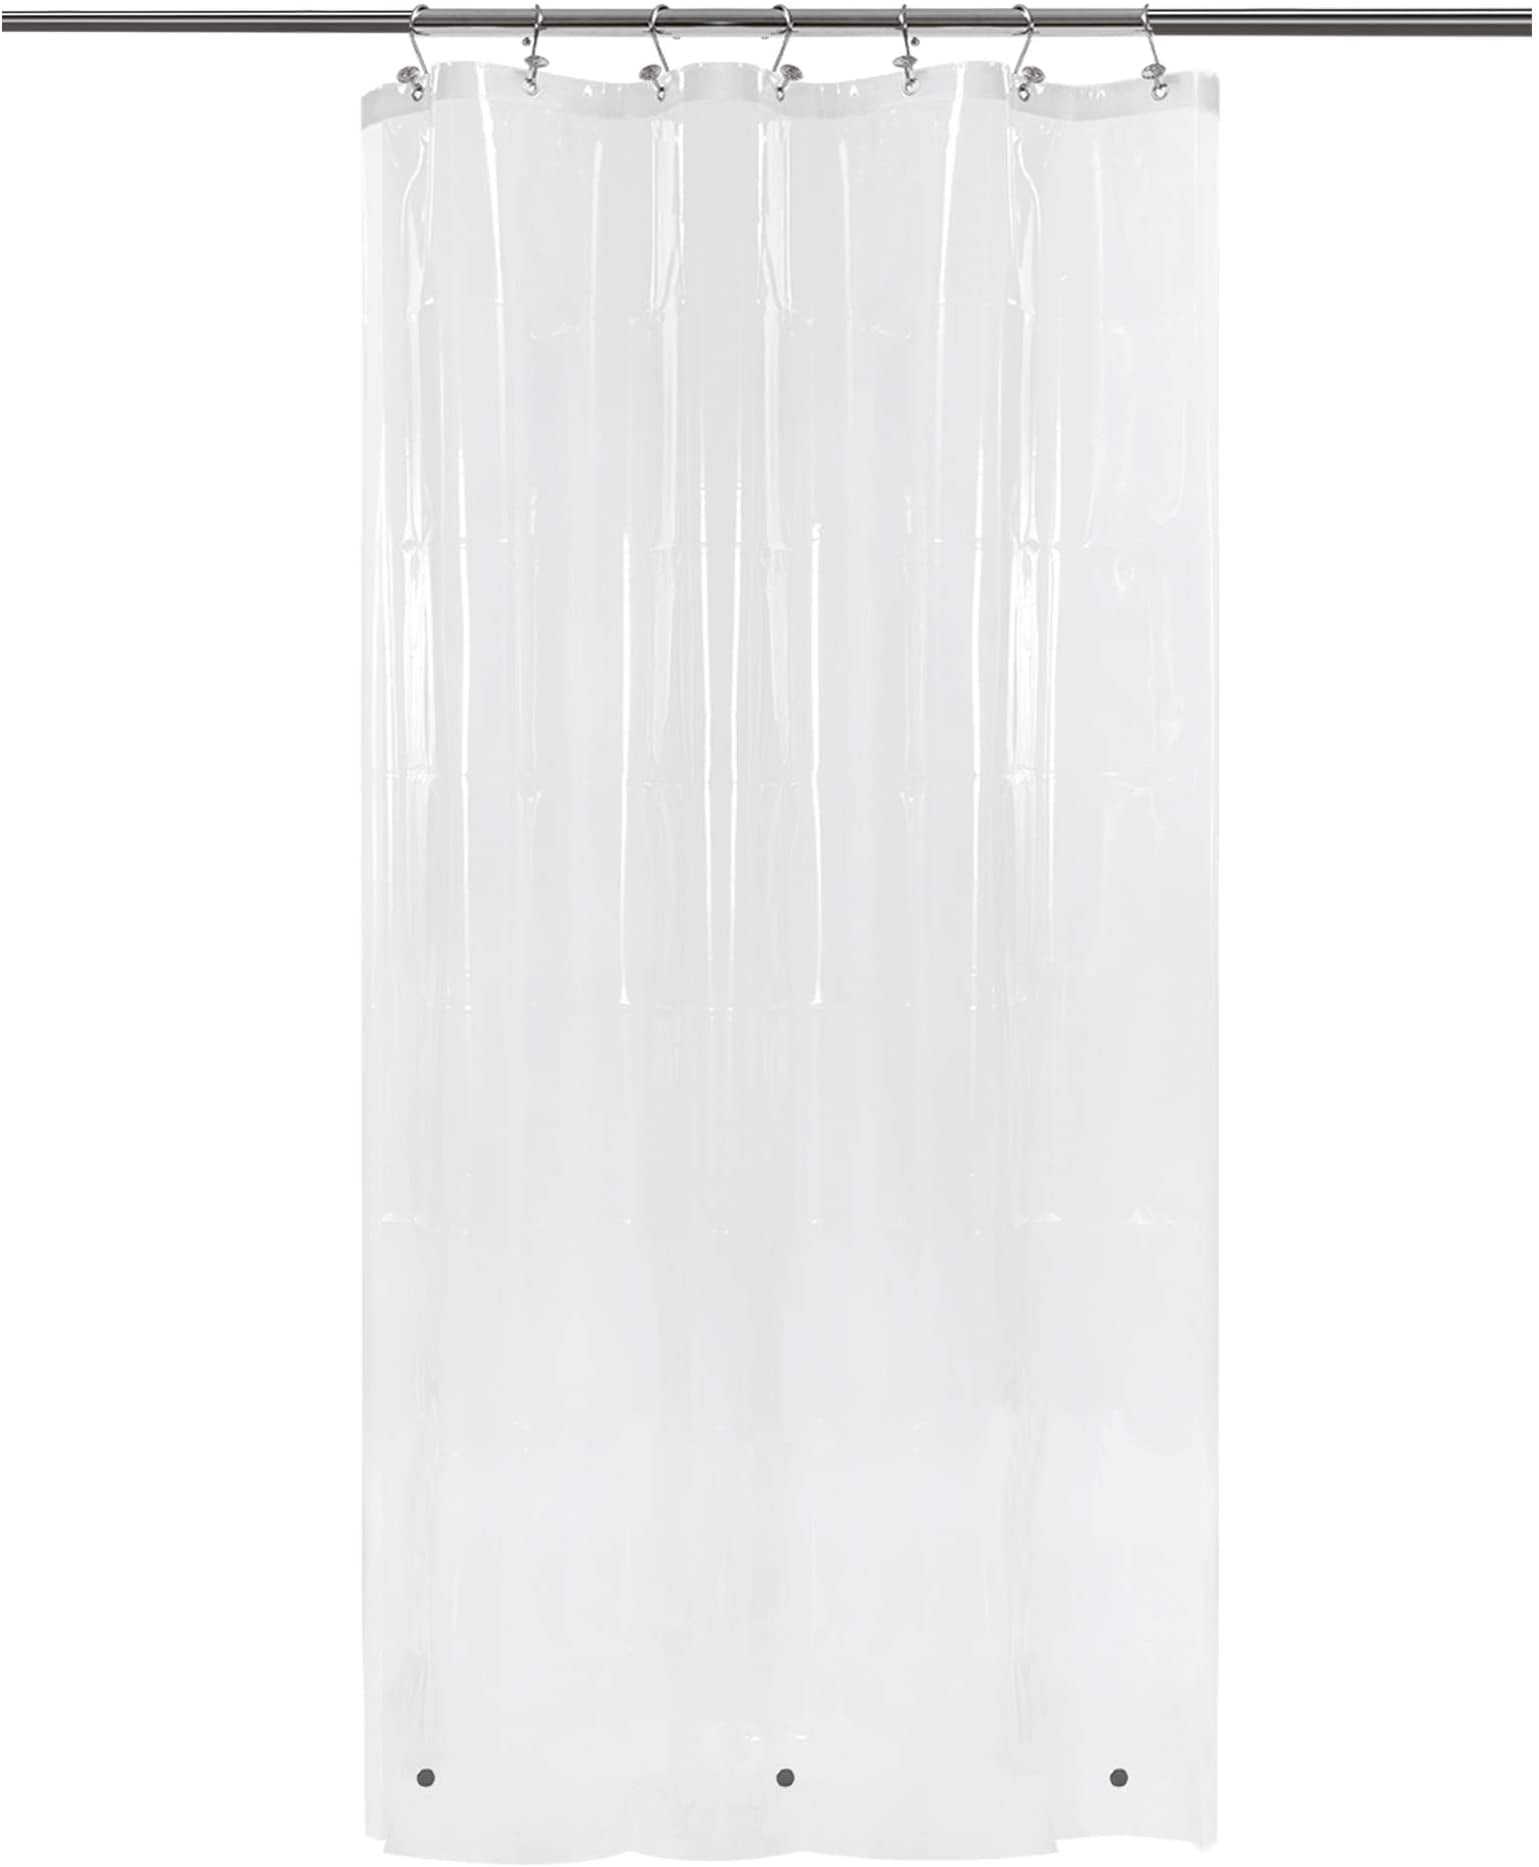 Small Shower Curtain Liner with 3 Magnets for Shower Stall Size 42 x 72 Inches 